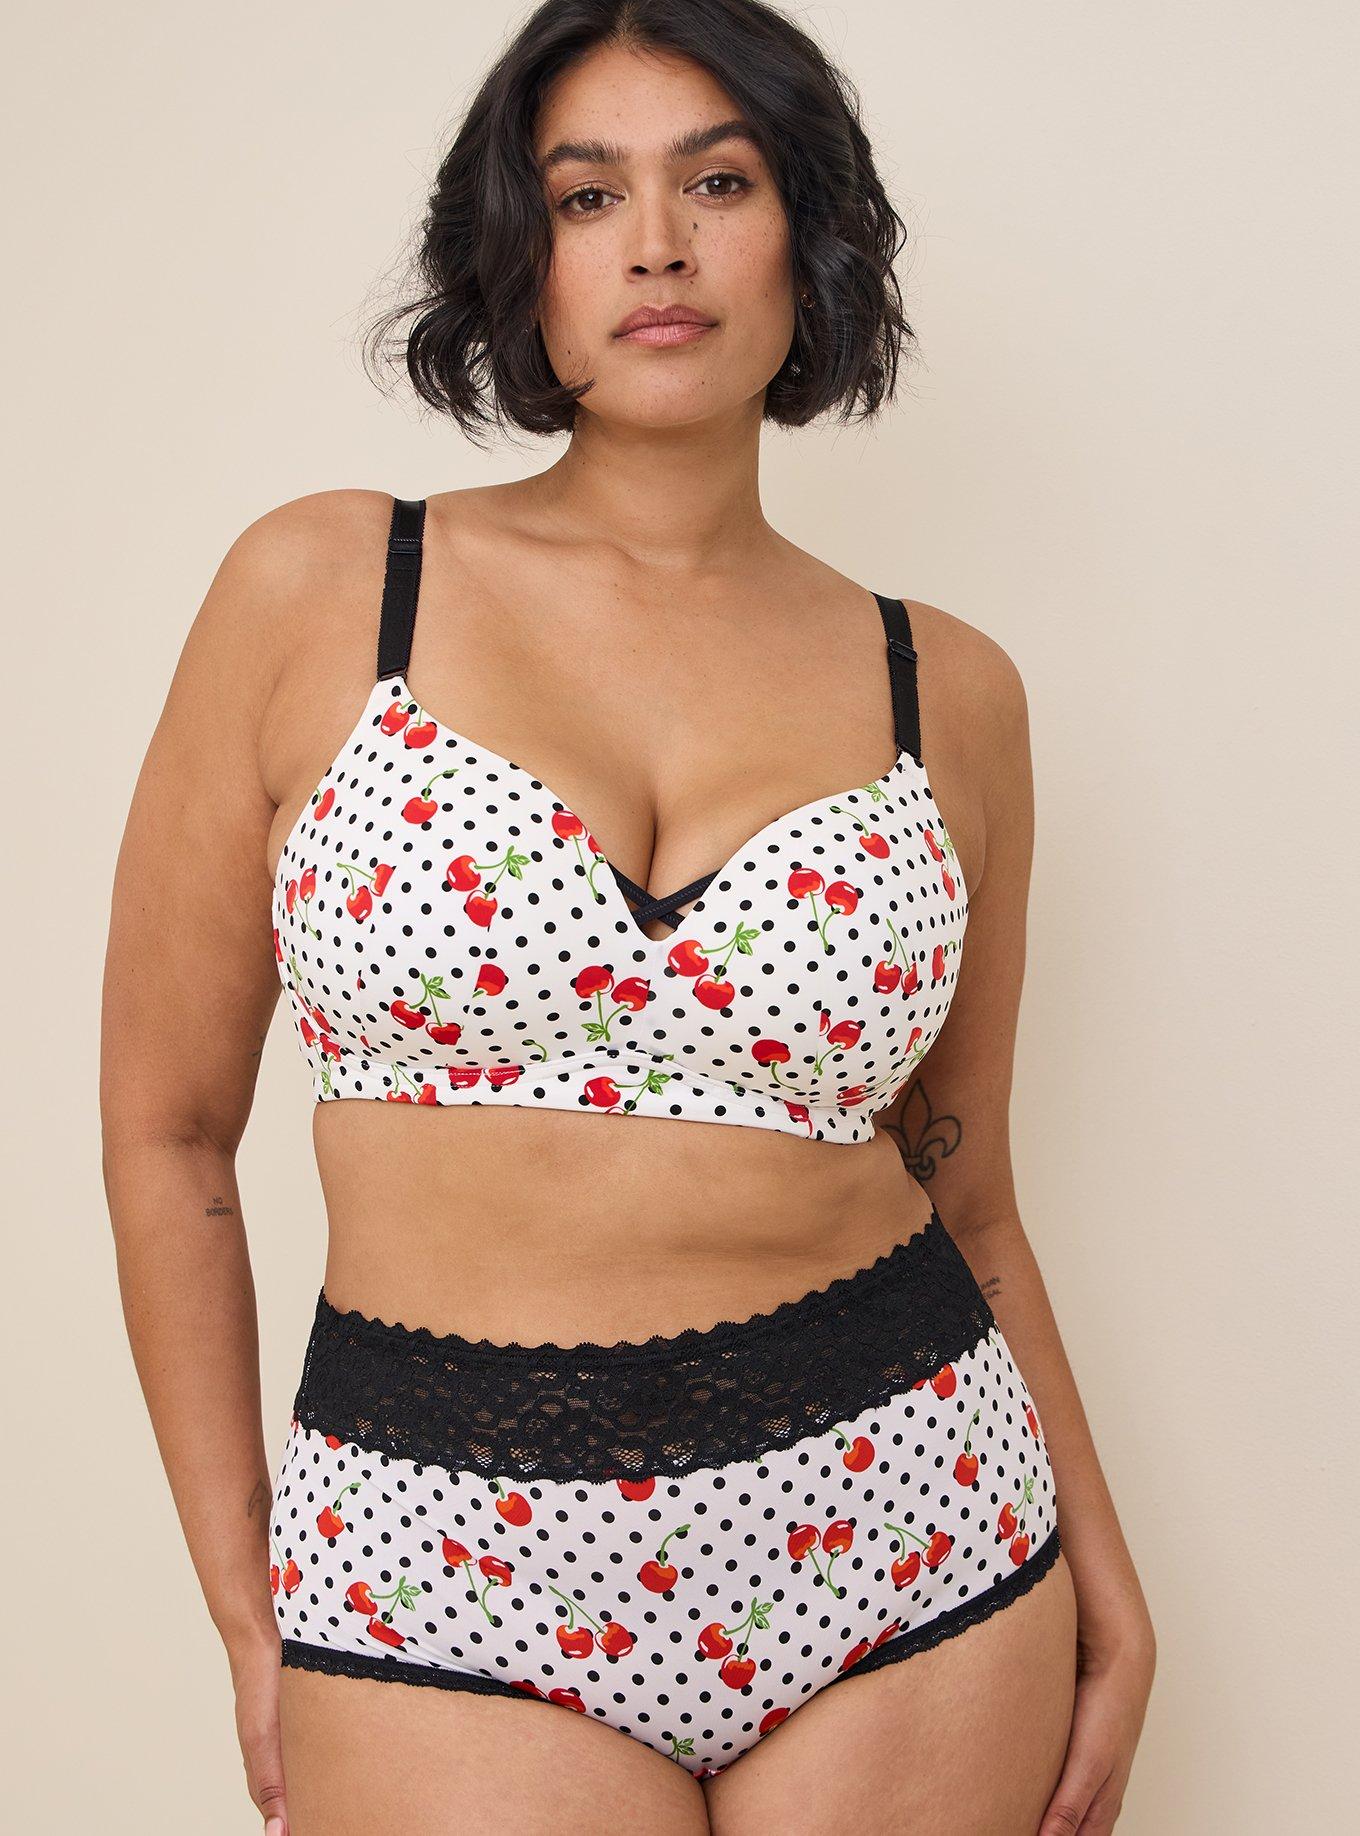 Grab Offers by Women's Two Type Design Seamless Polka Printed